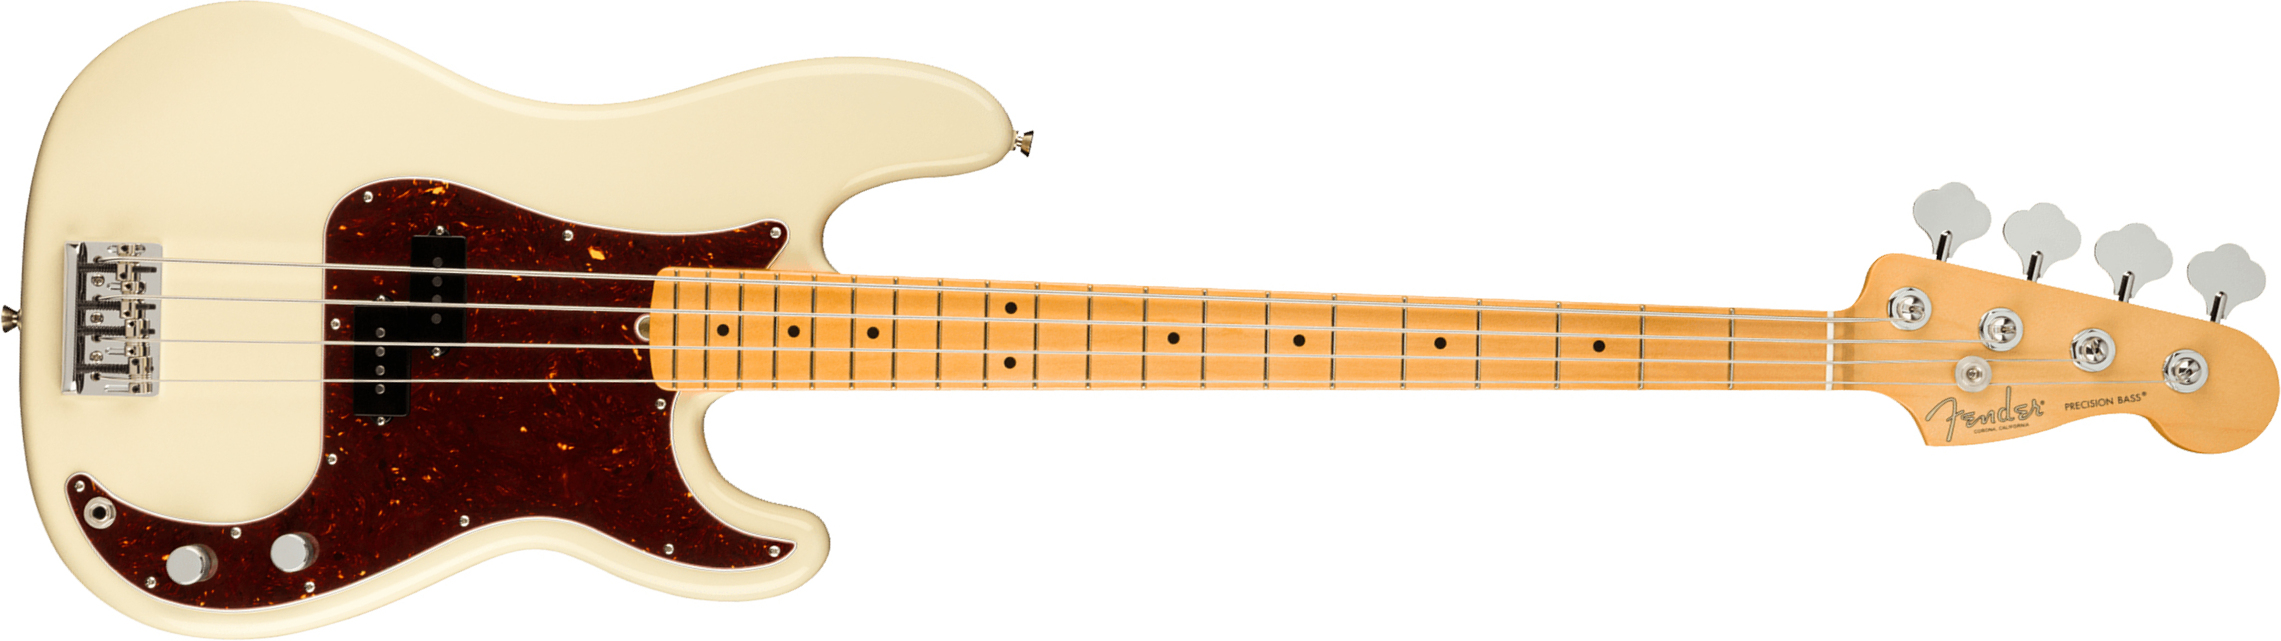 Fender Precision Bass American Professional Ii Usa Mn - Olympic White - Solid body electric bass - Main picture